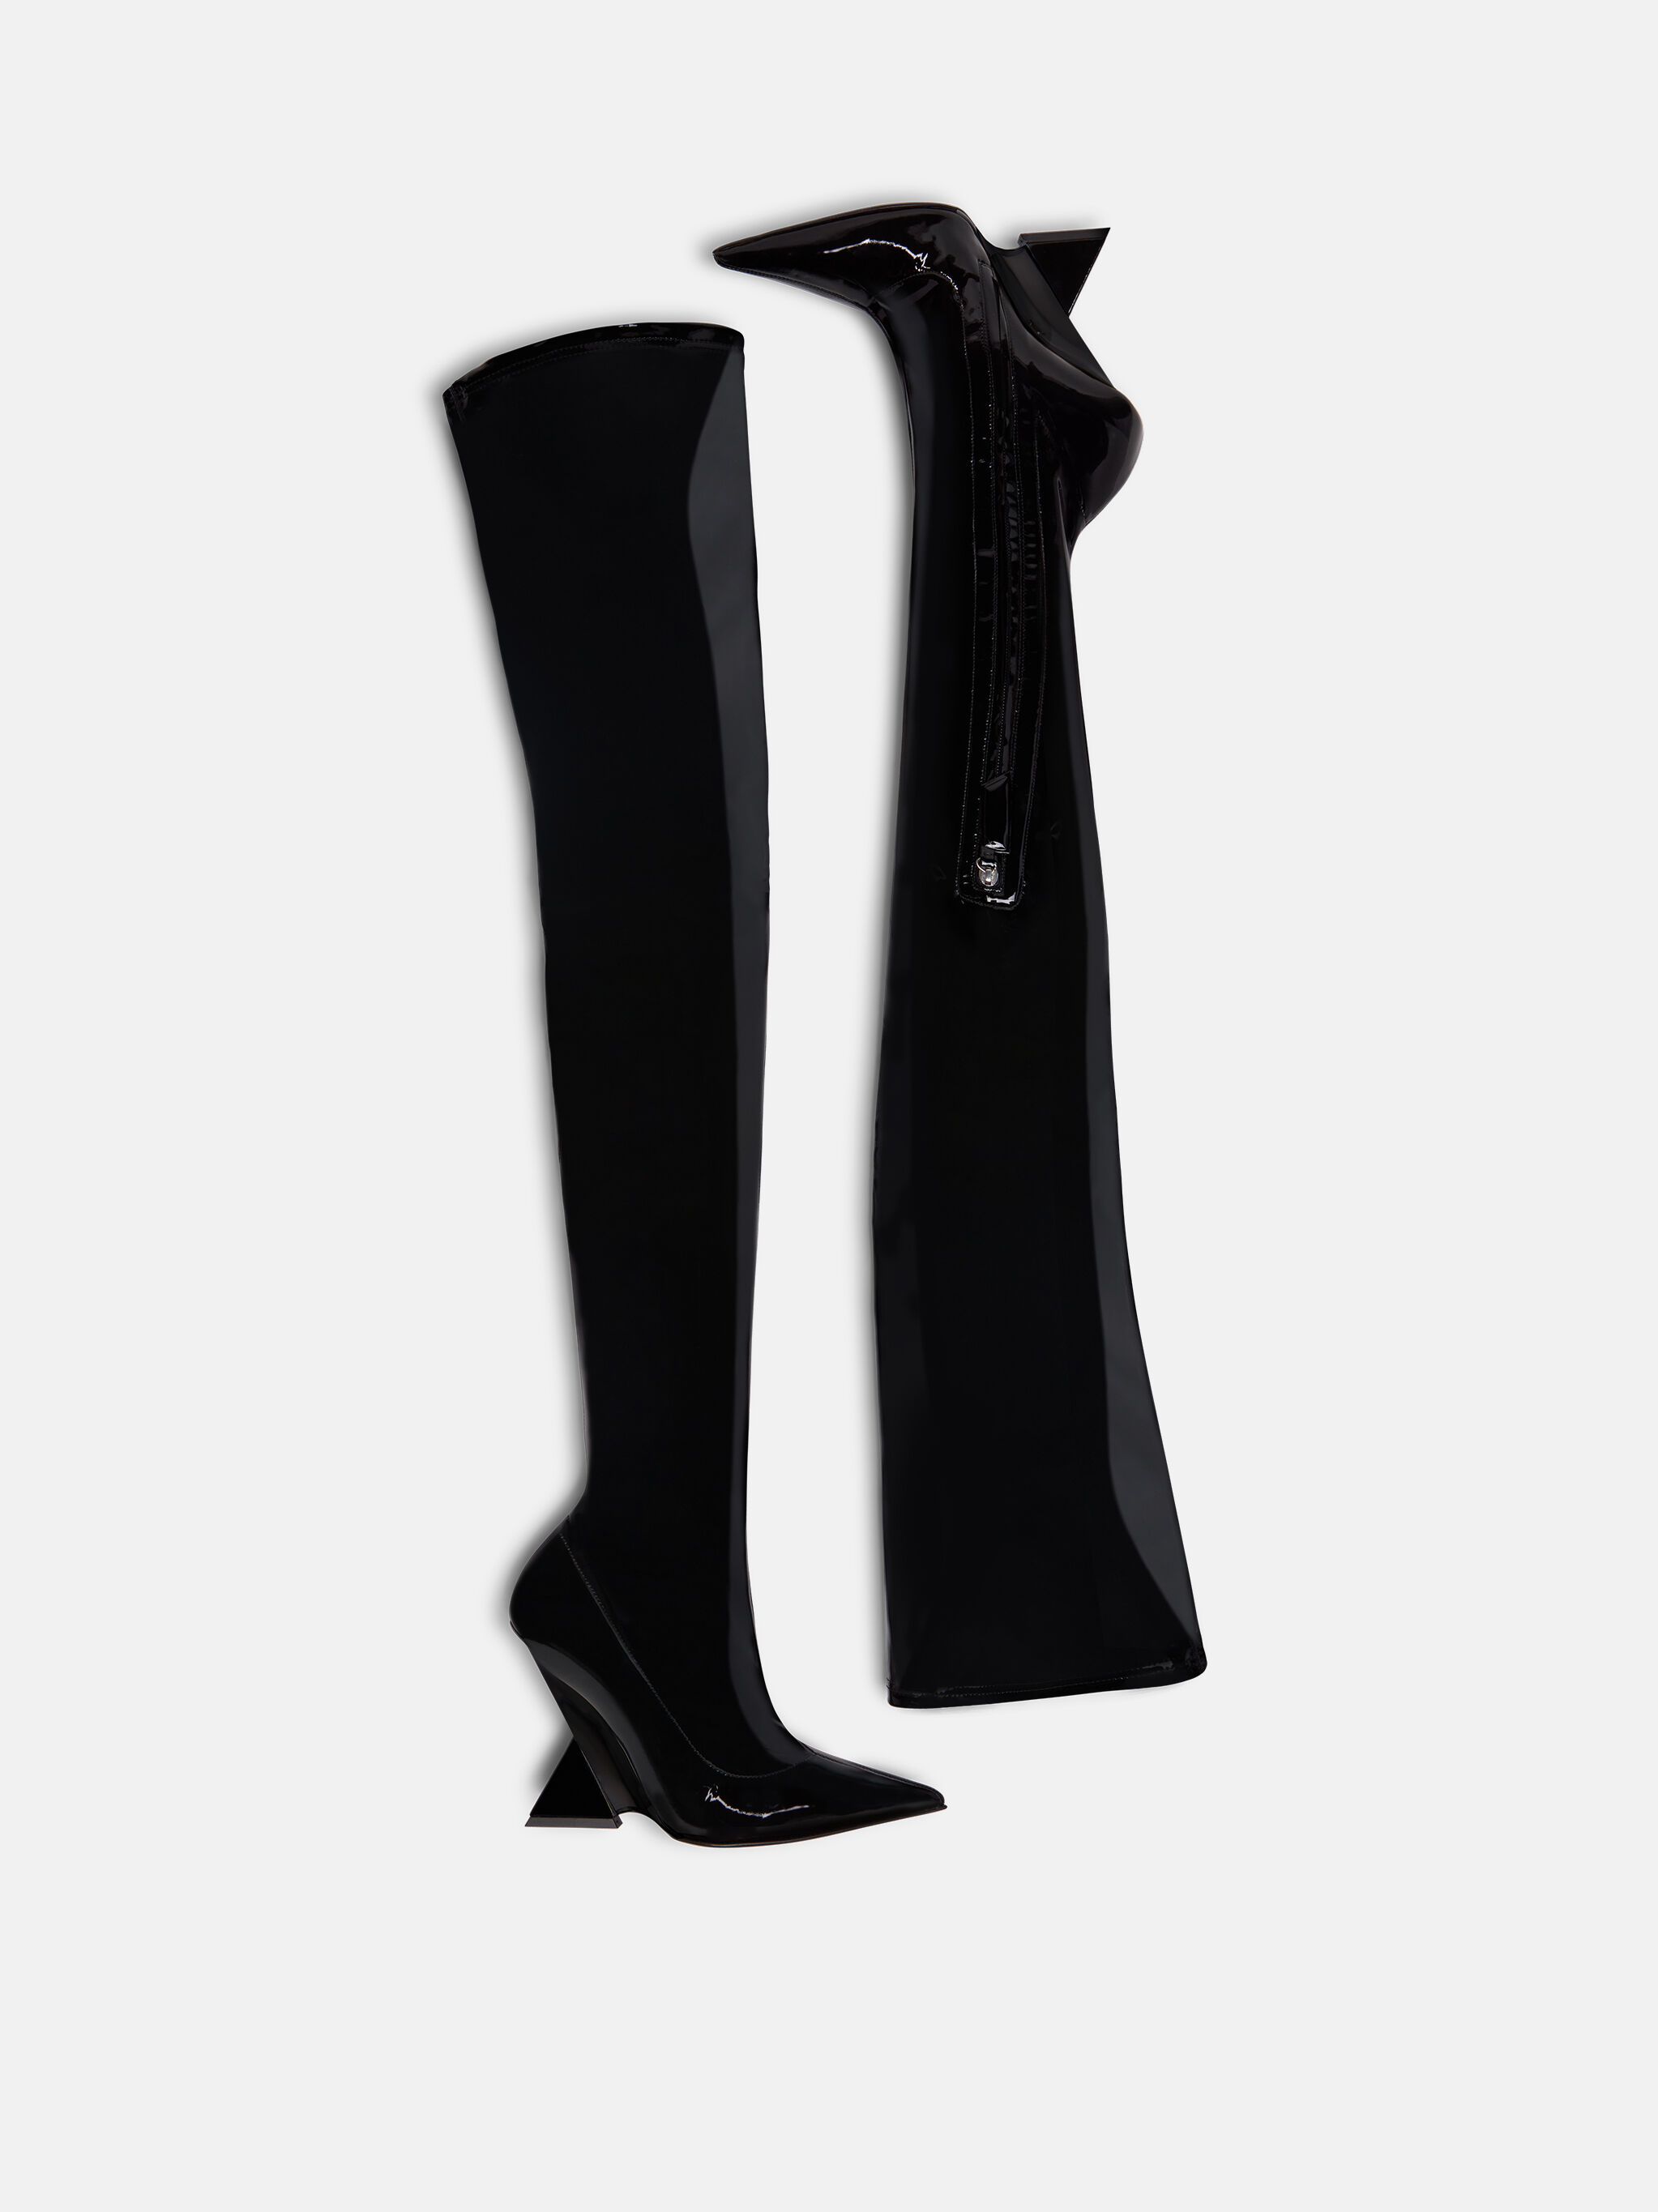 Cheope leather knee-high boots